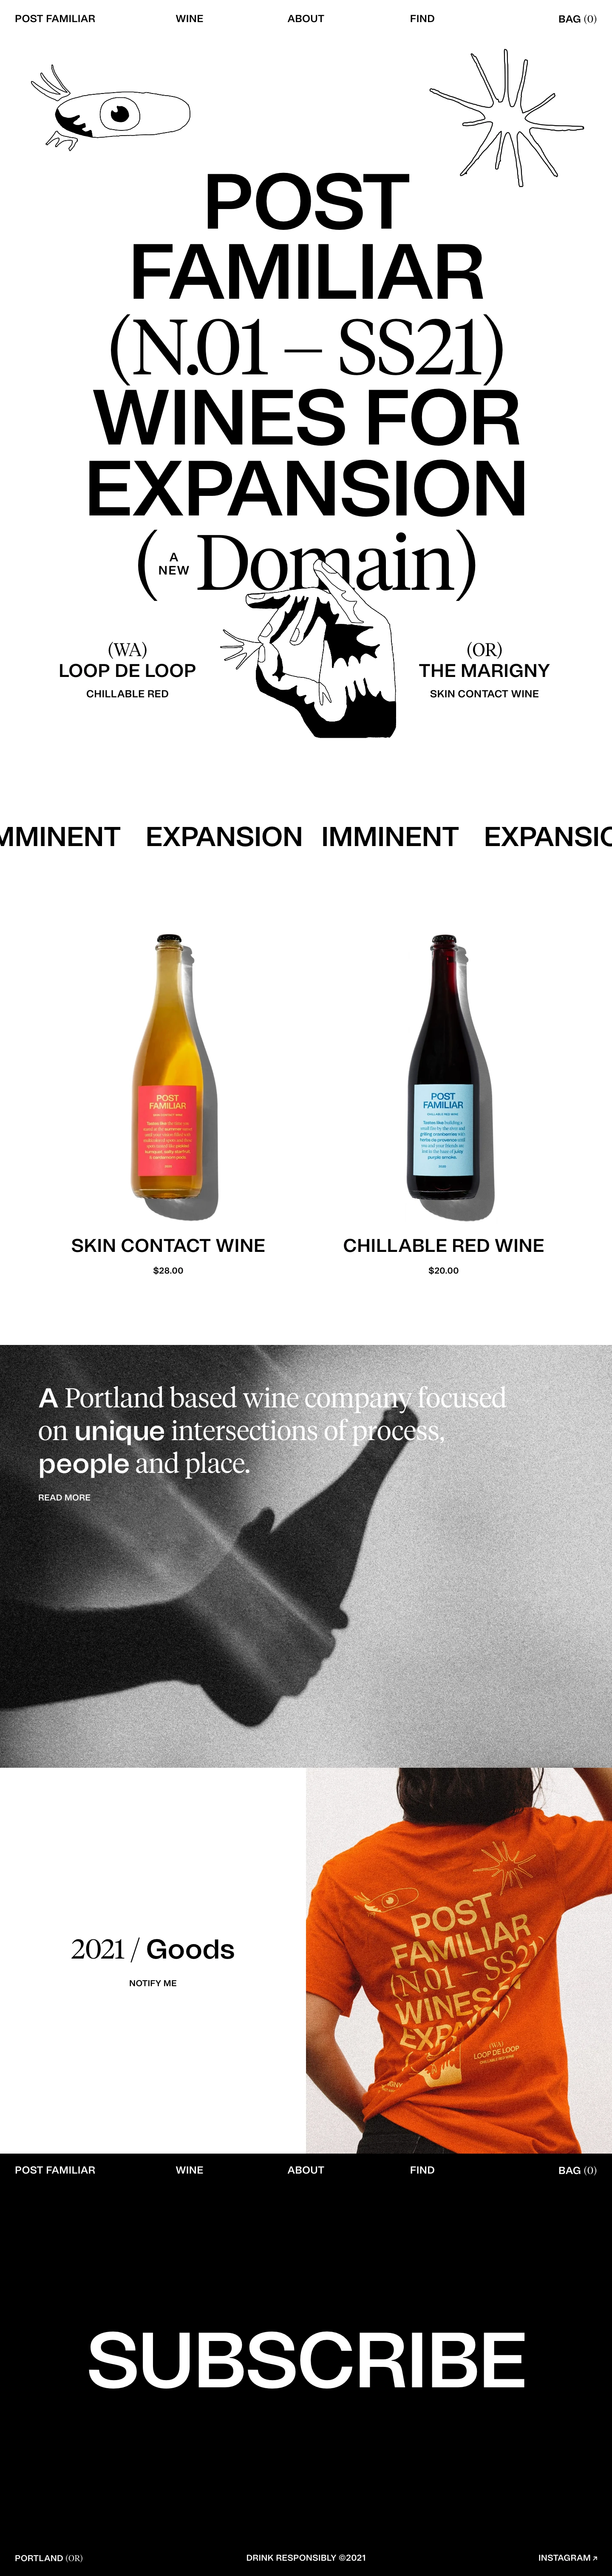 Post Familiar Wine Landing Page Example: A new domain. We partner with creative winemakers to co-create sustainable wines with nuance and novelty.